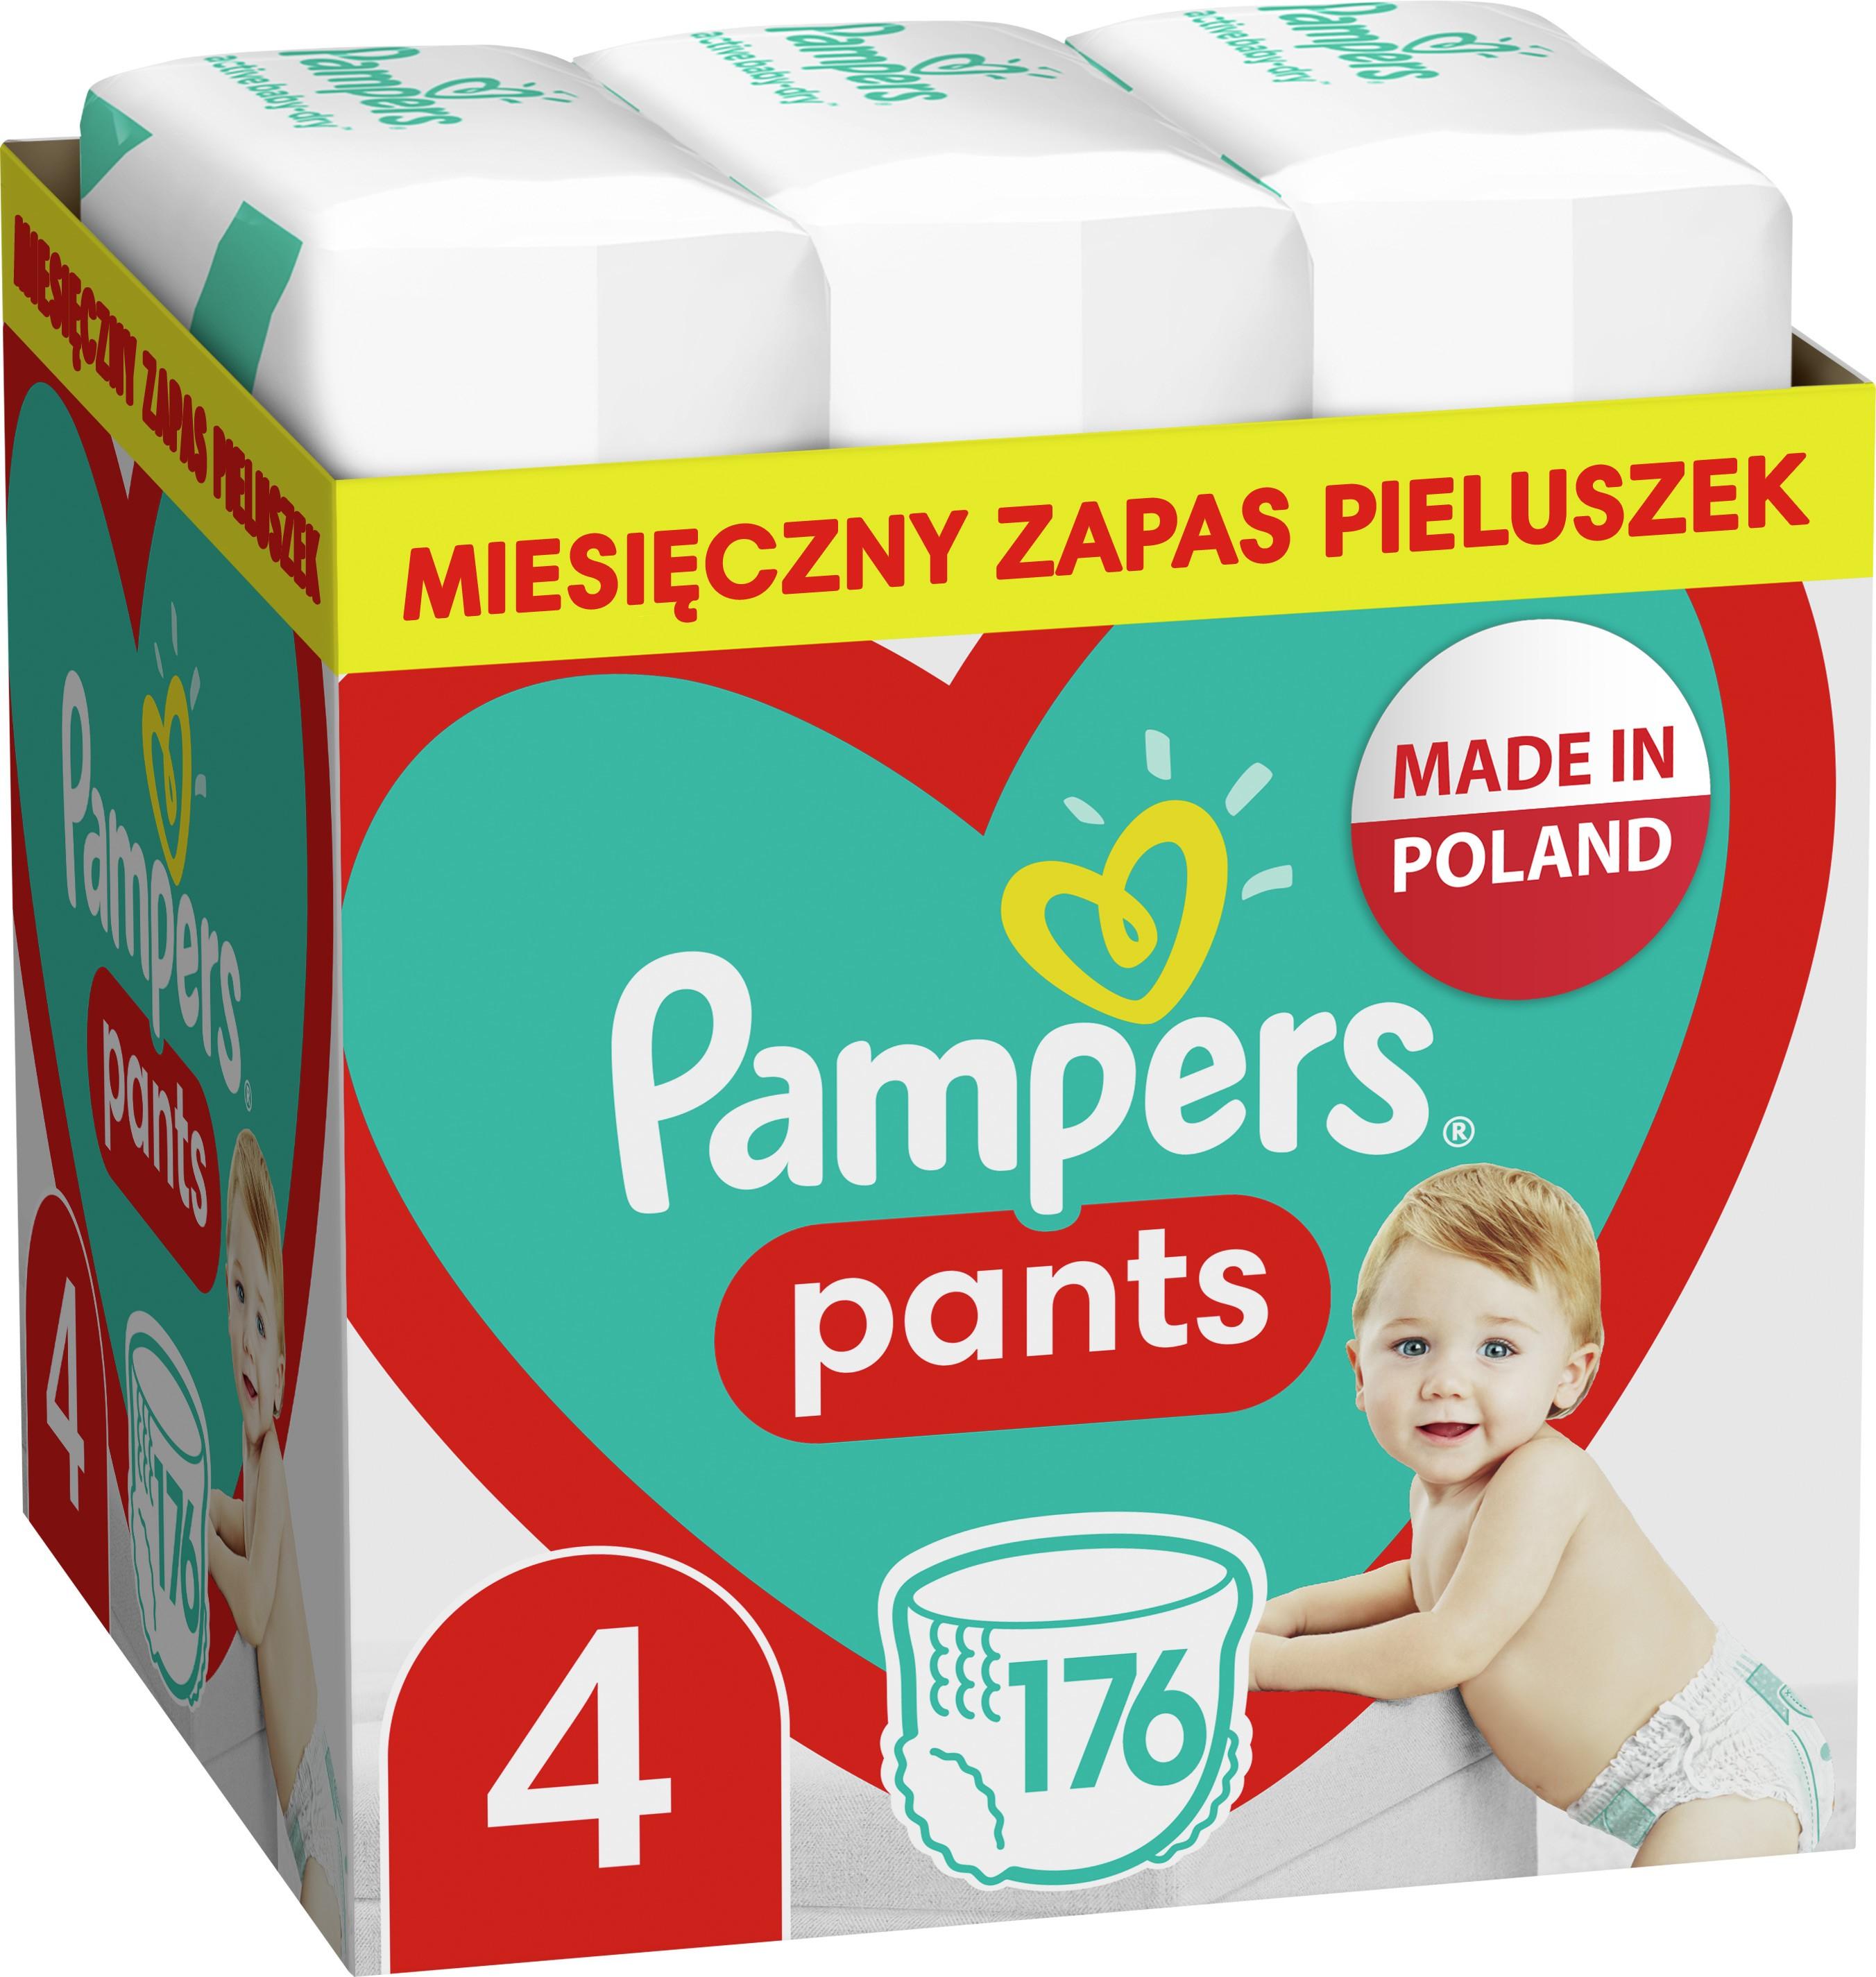 Pampers Pants Boy/Girl 4 176 pc(s)